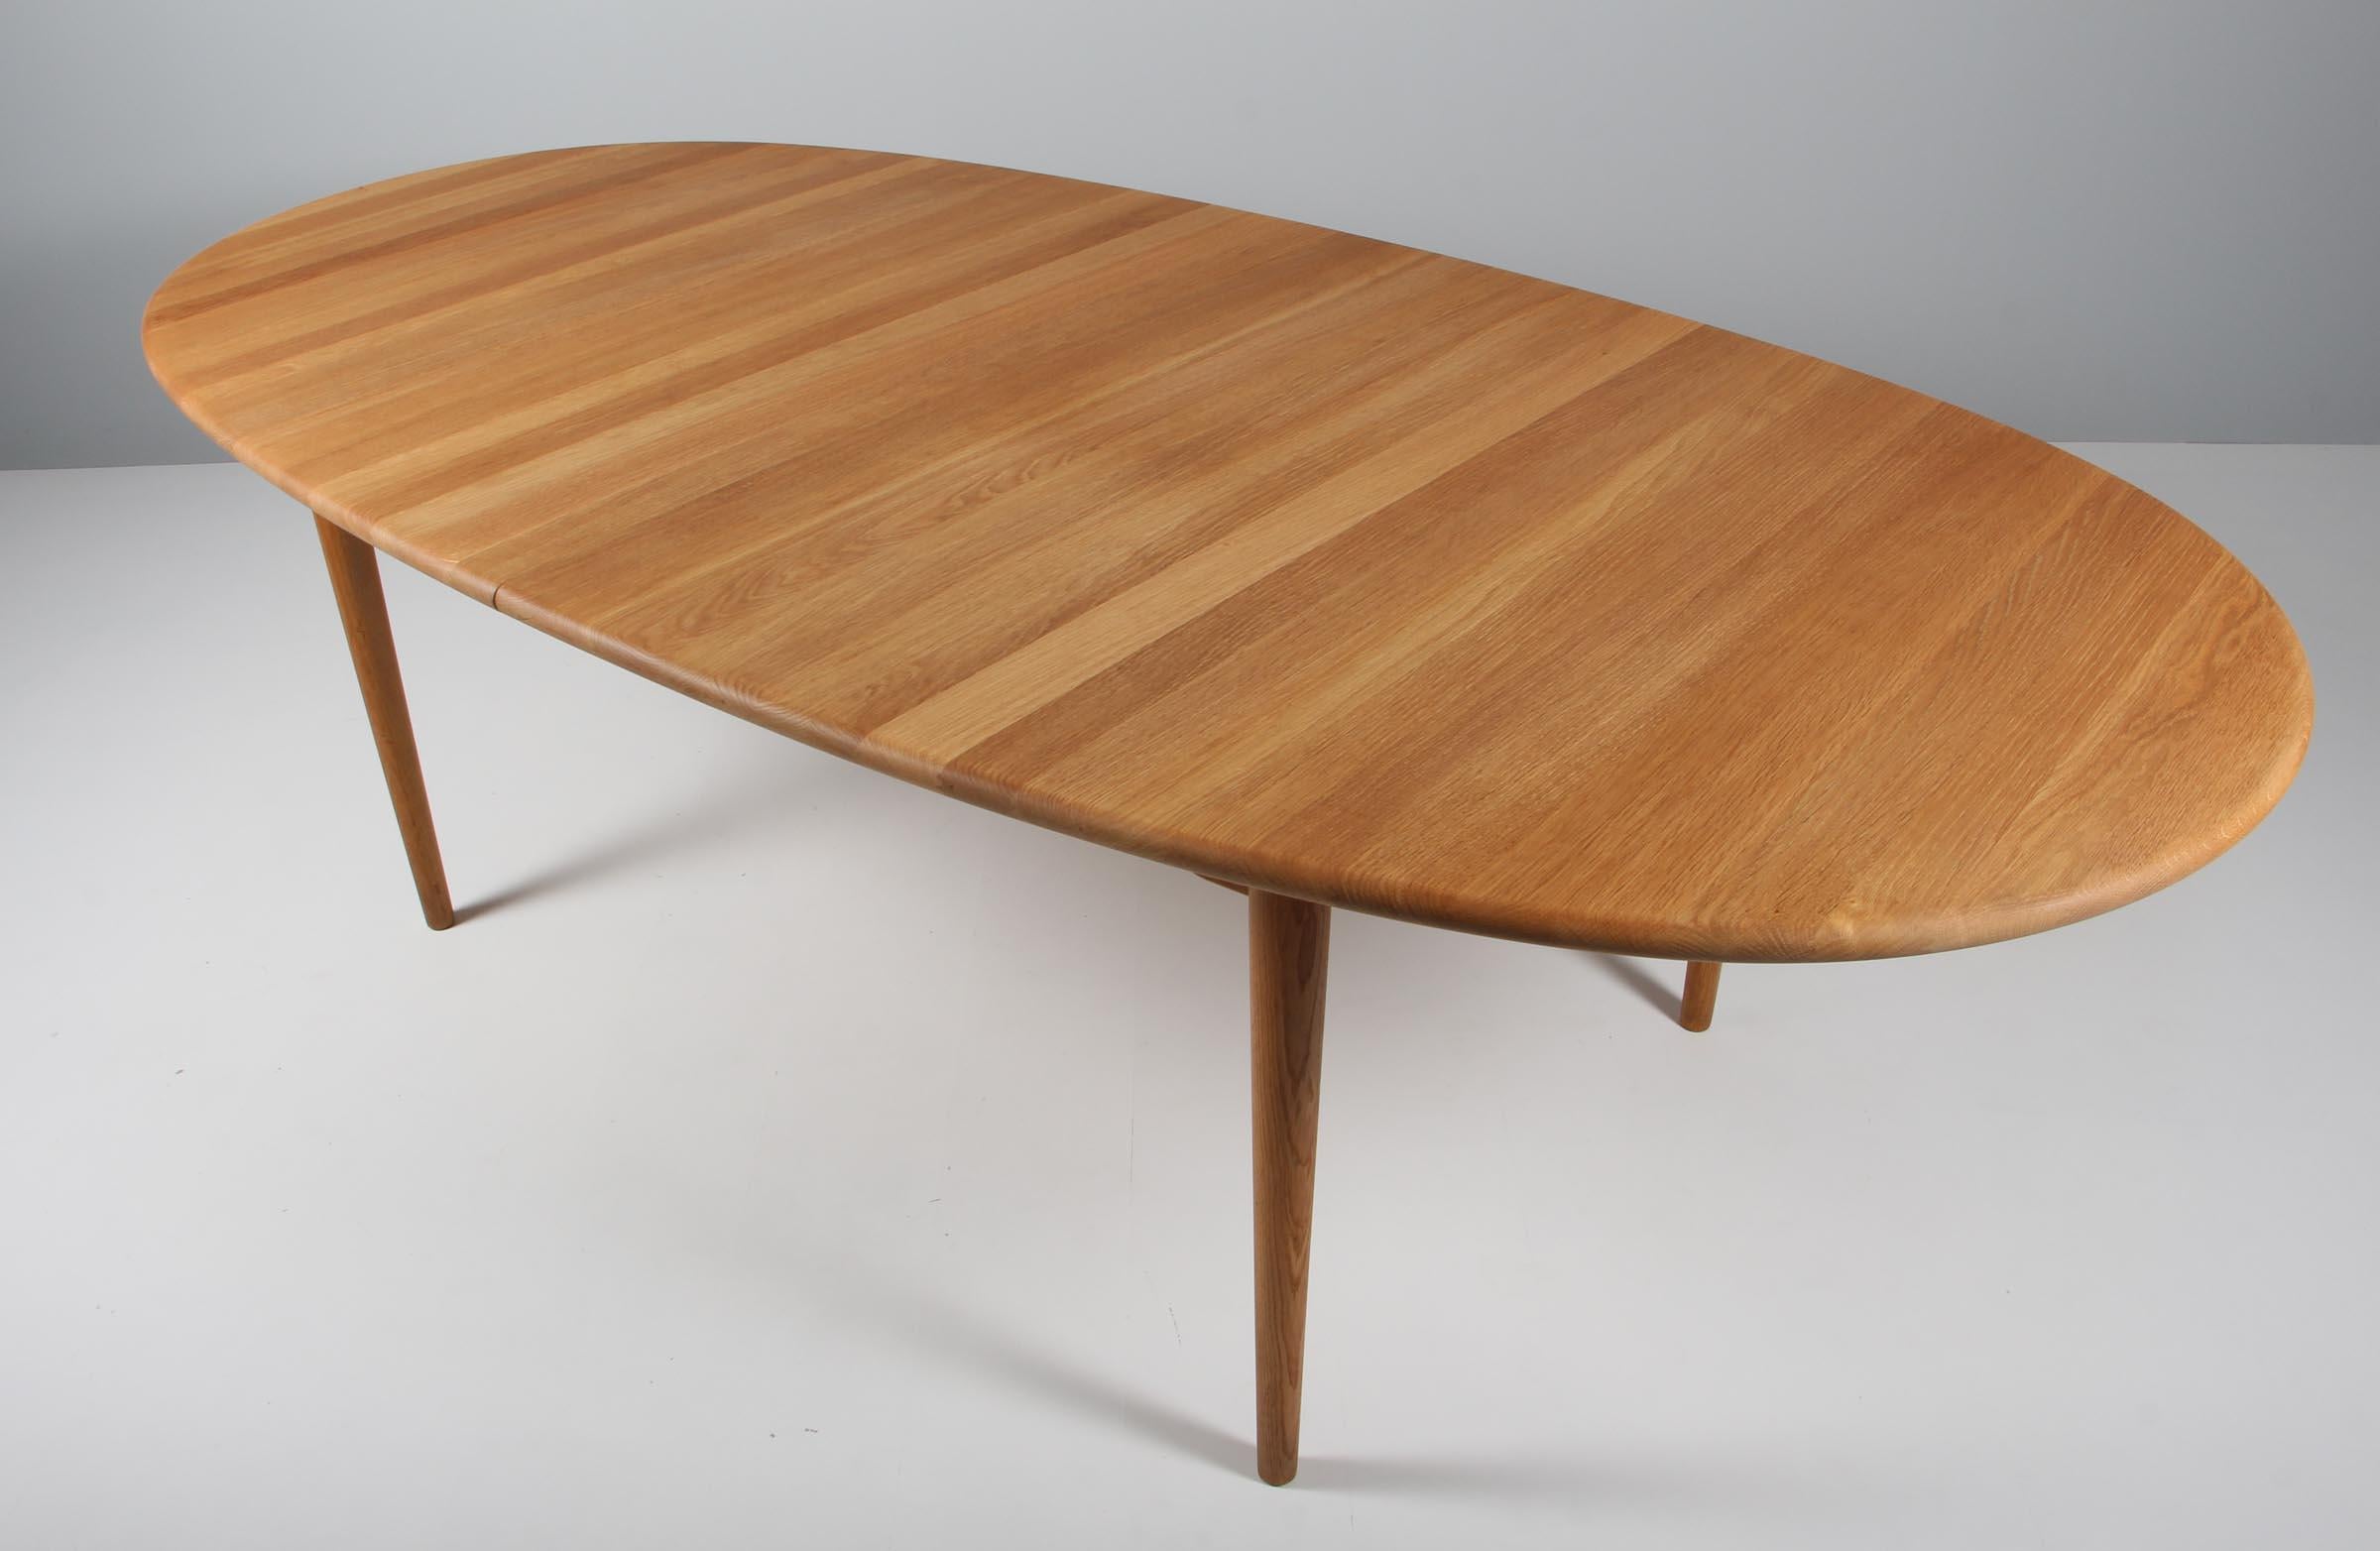 Hans J. Wegner dining table made of solid oiled oak, one solid extension leaf

Base of solid oak

Model CH339, made by Tranekjær for Carl Hansen.